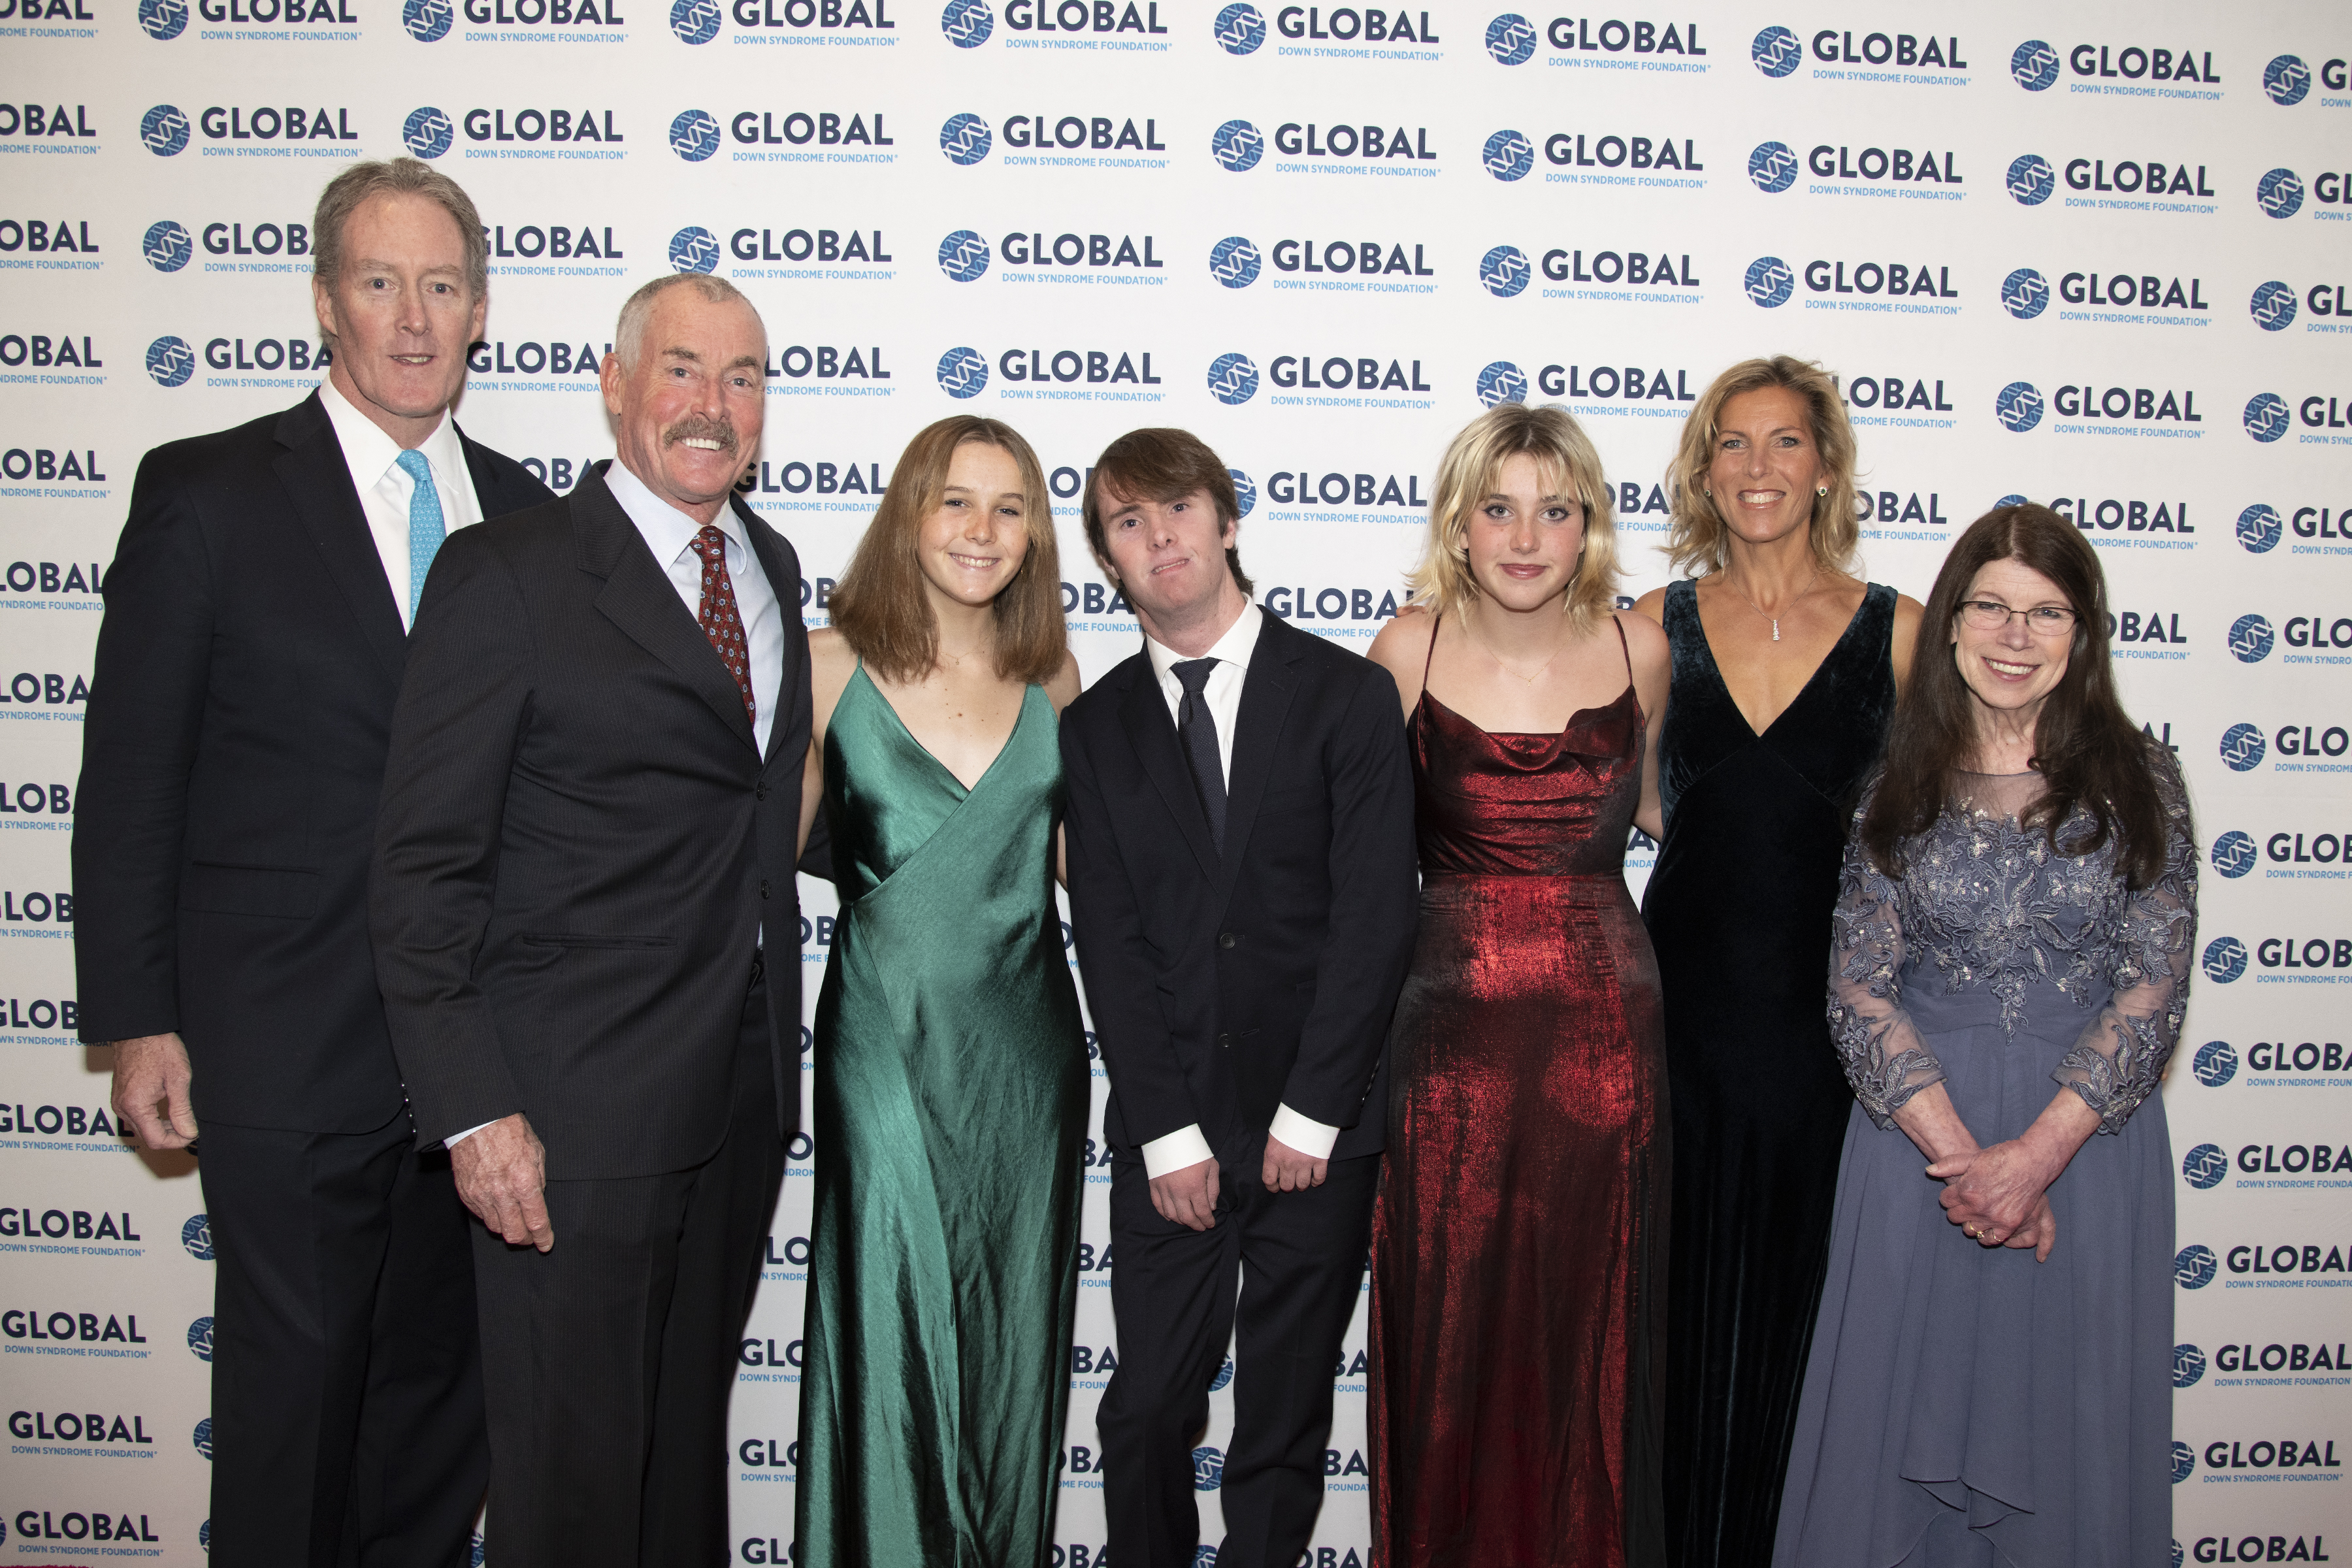 John C. McGinley with his son Max McGinley their family at at the Global Down Syndrome Foundation "Be Beautiful, Be Yourself" fashion show in Colorado in 2016 | Getty Images